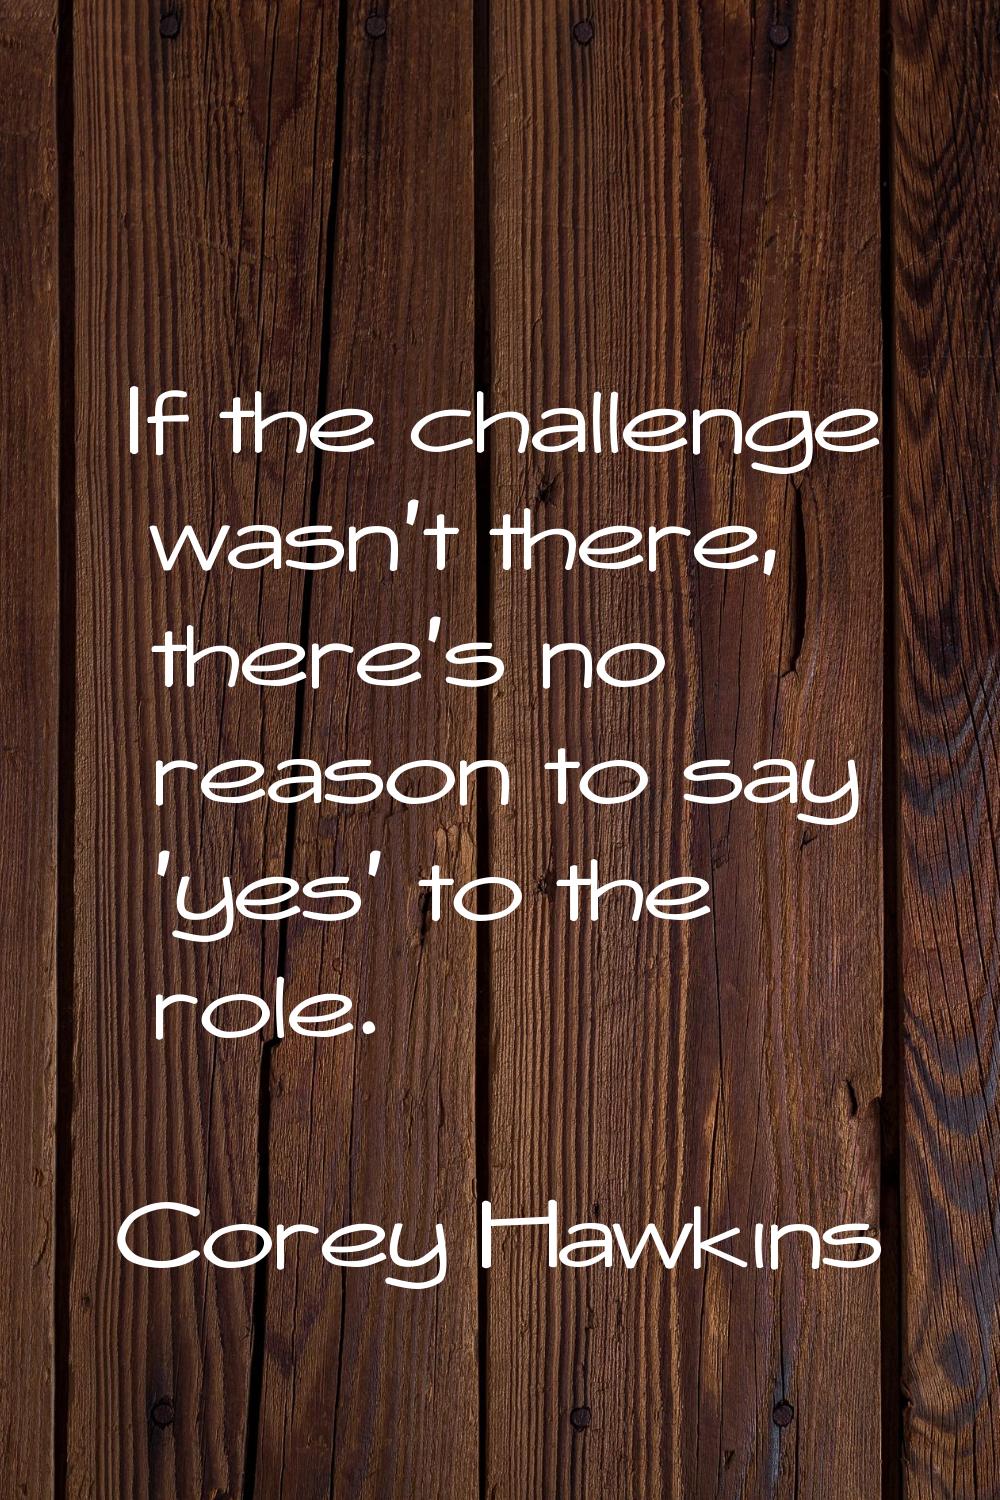 If the challenge wasn't there, there's no reason to say 'yes' to the role.